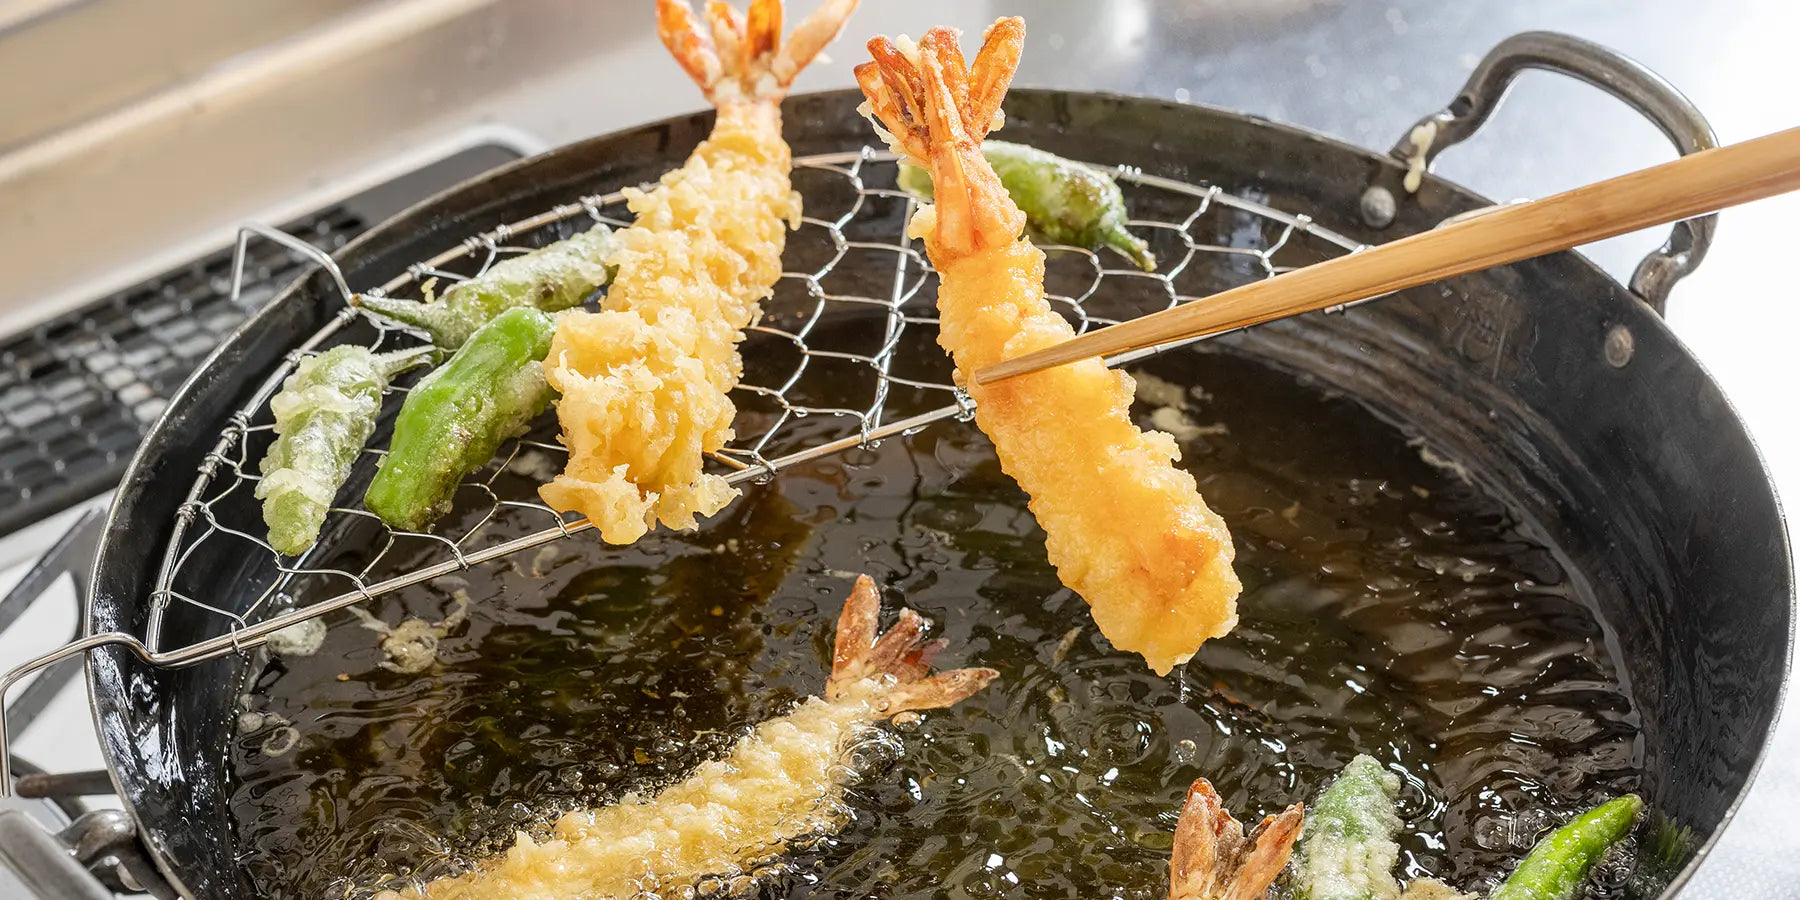 Discover our great selection of Tempura Pans at Globalkitchen Japan.